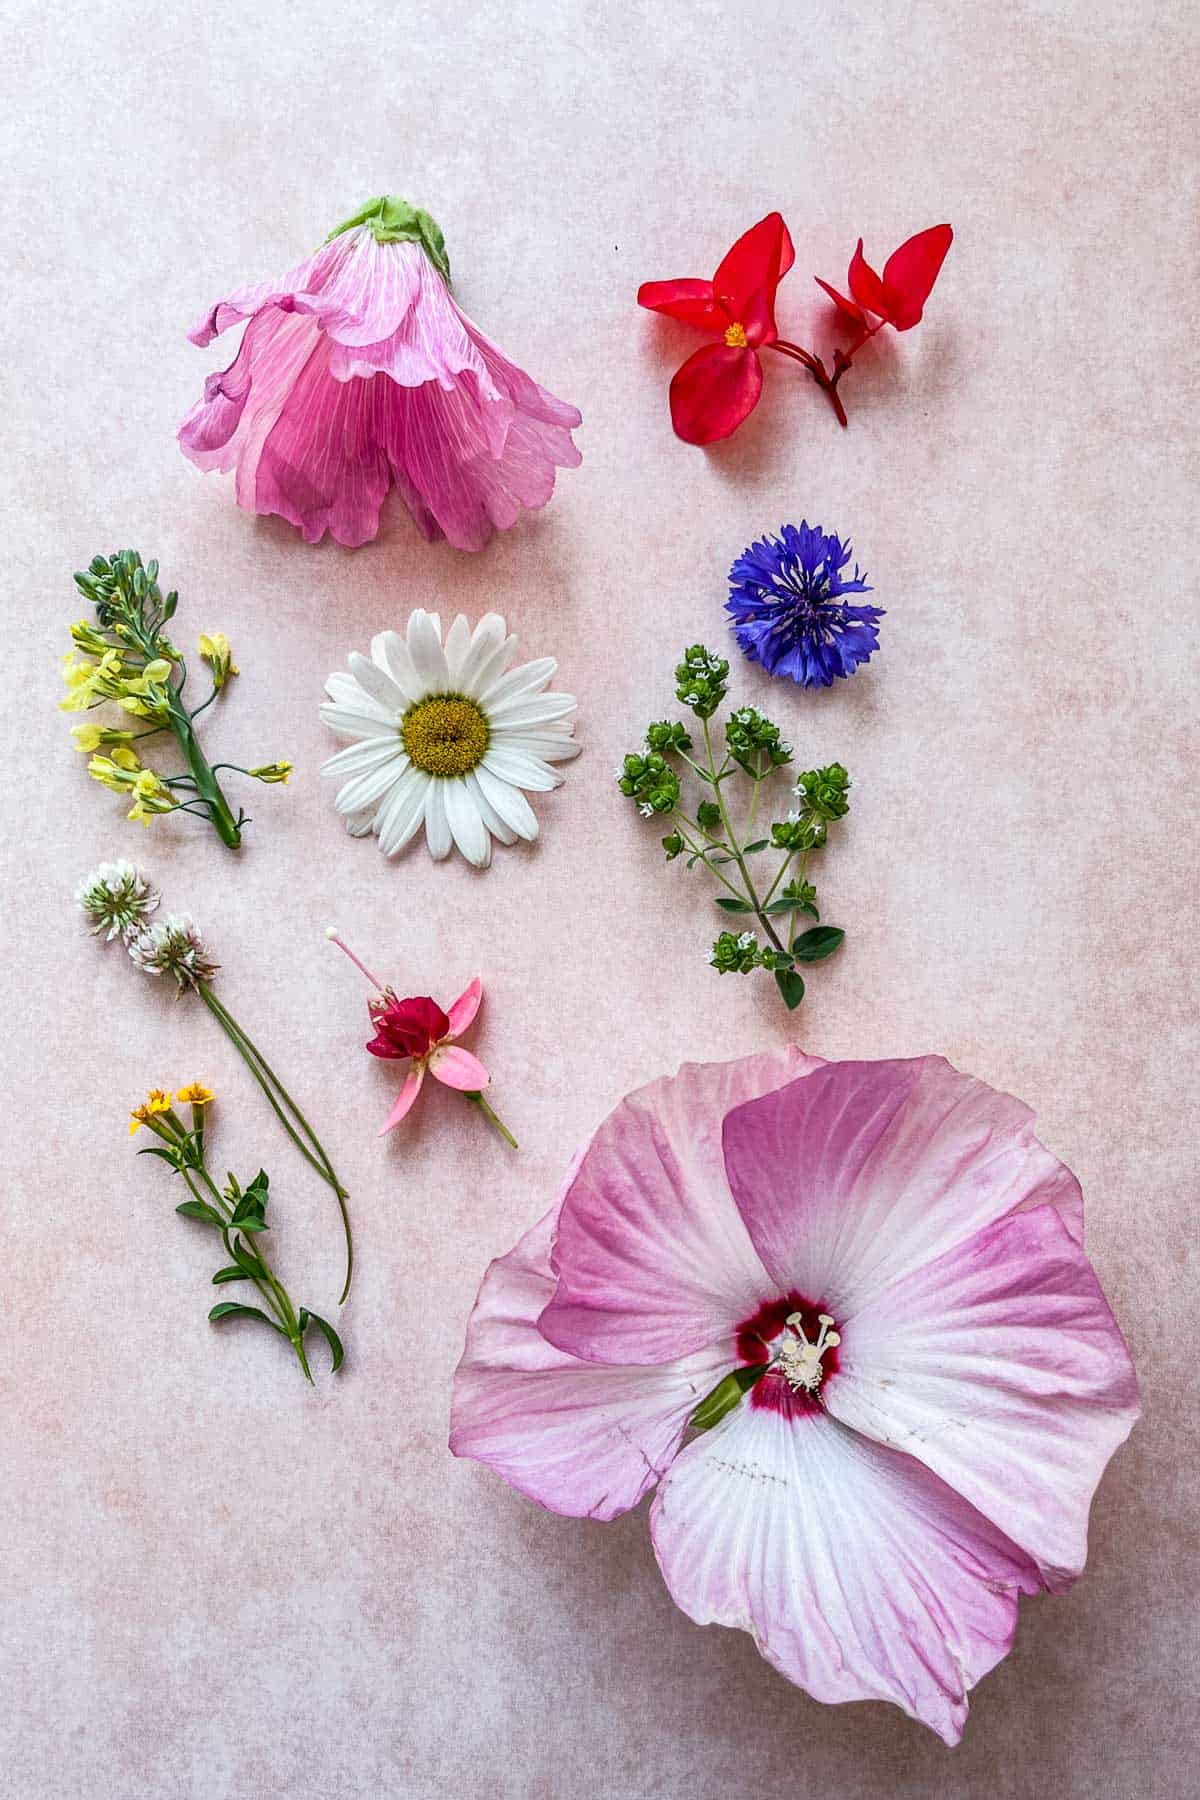 A grouping of edible flowers.